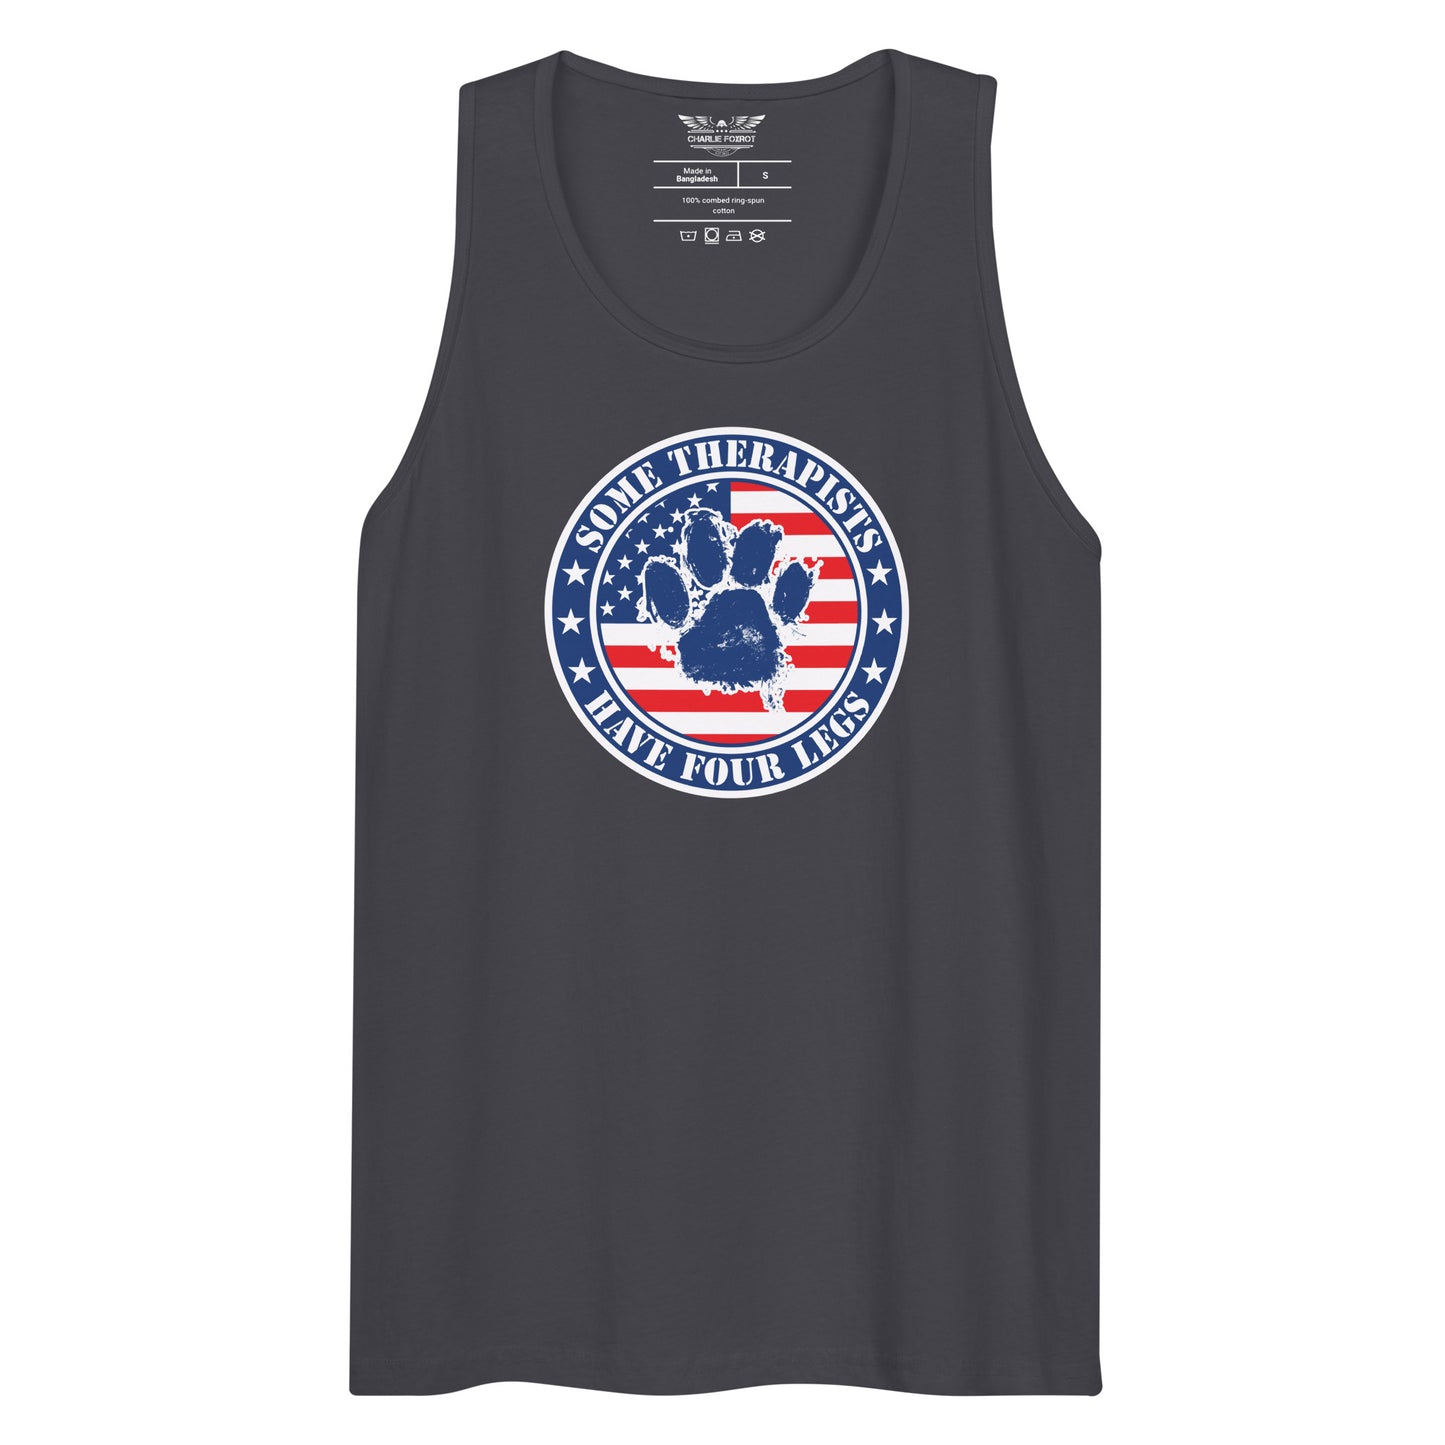 Some Therapists Have Four Legs Service Dog Paw Flag Unisex Tank Top